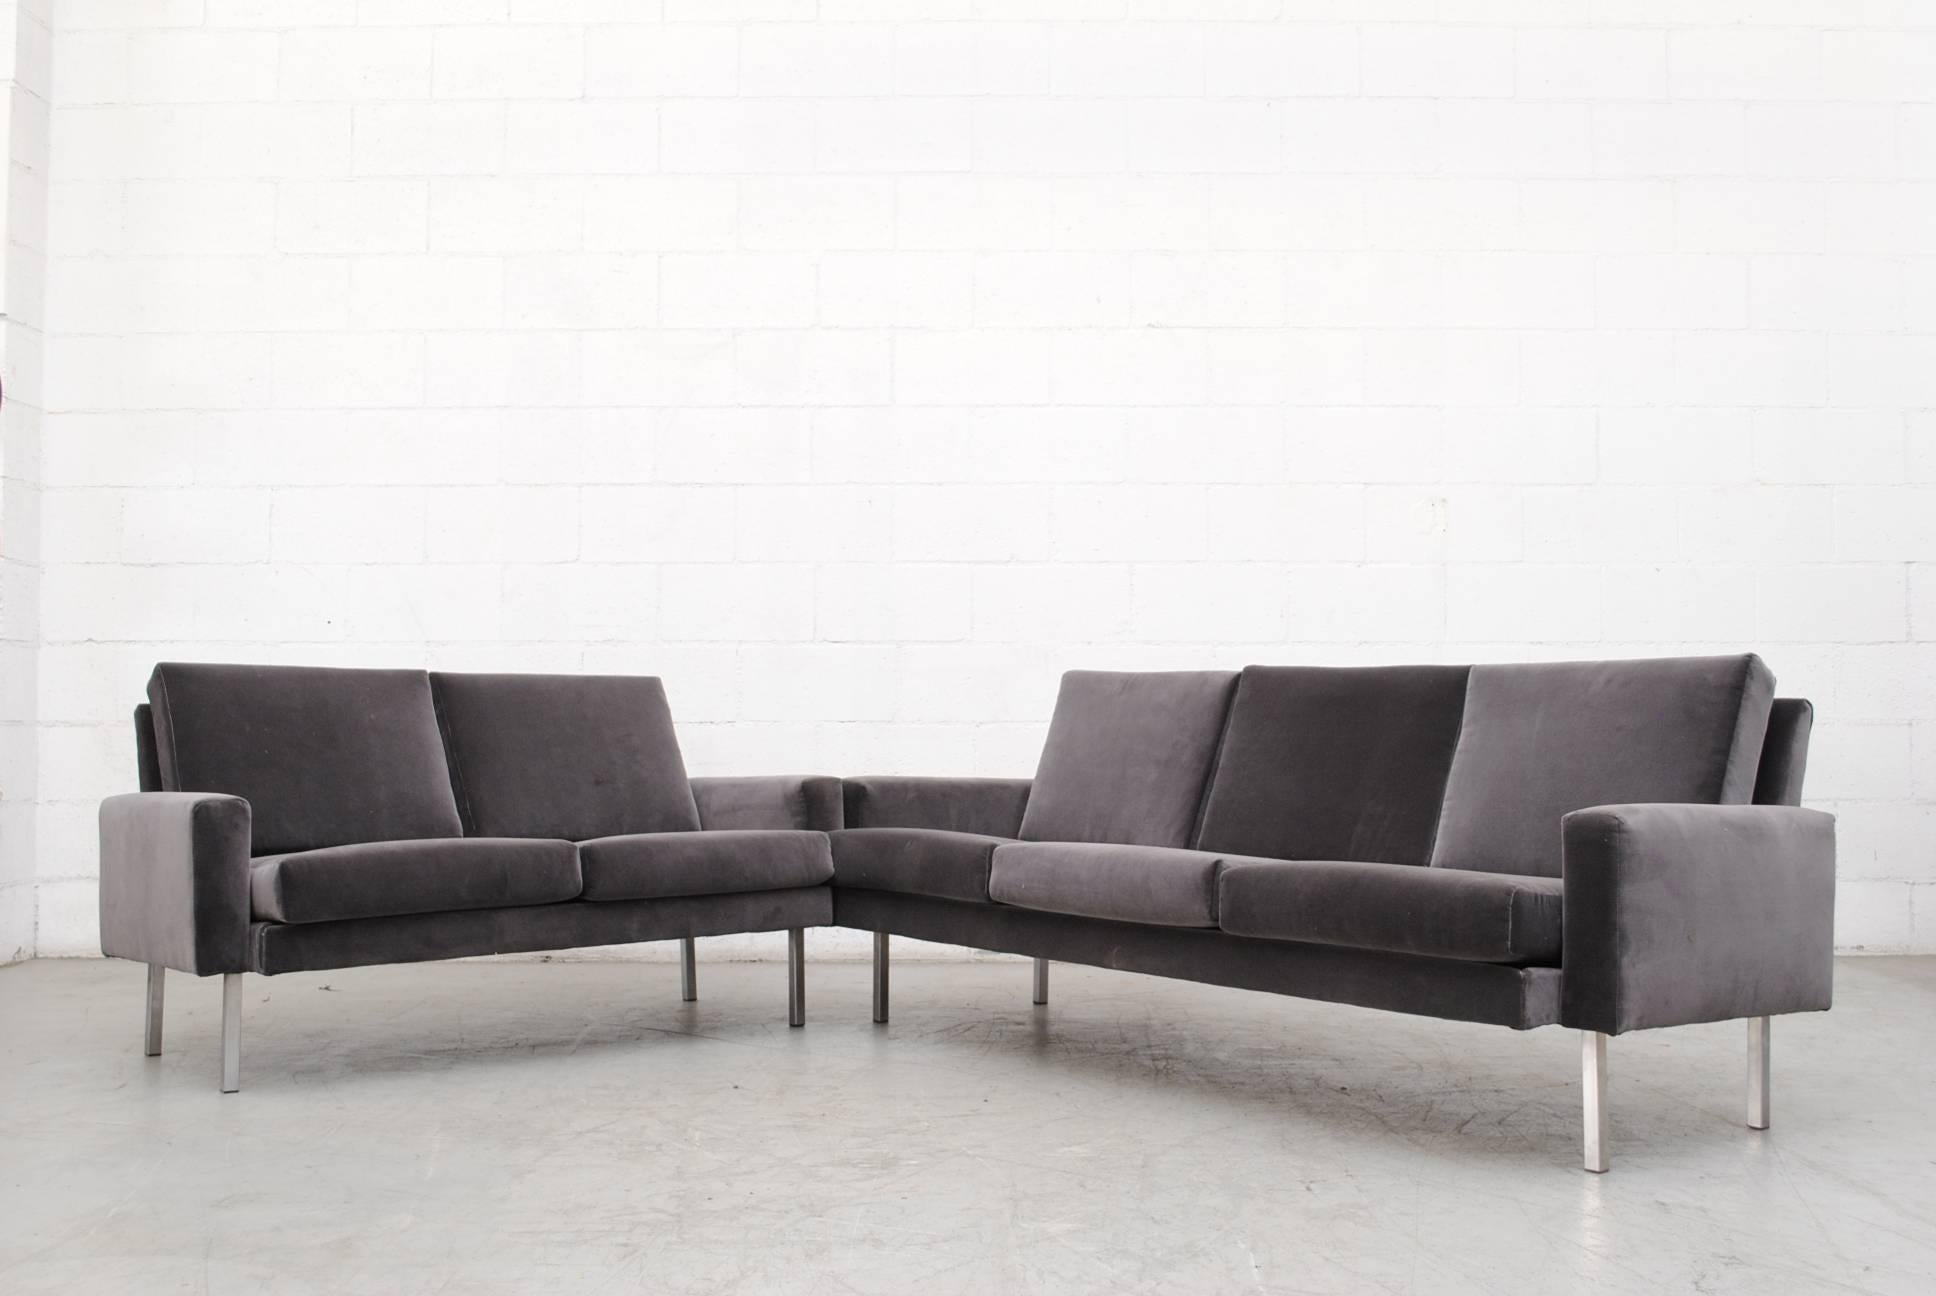 Loveseat by Martin Visser. Brand new grey velvet upholstery with chrome legs. Legs in original condition with visible wear.